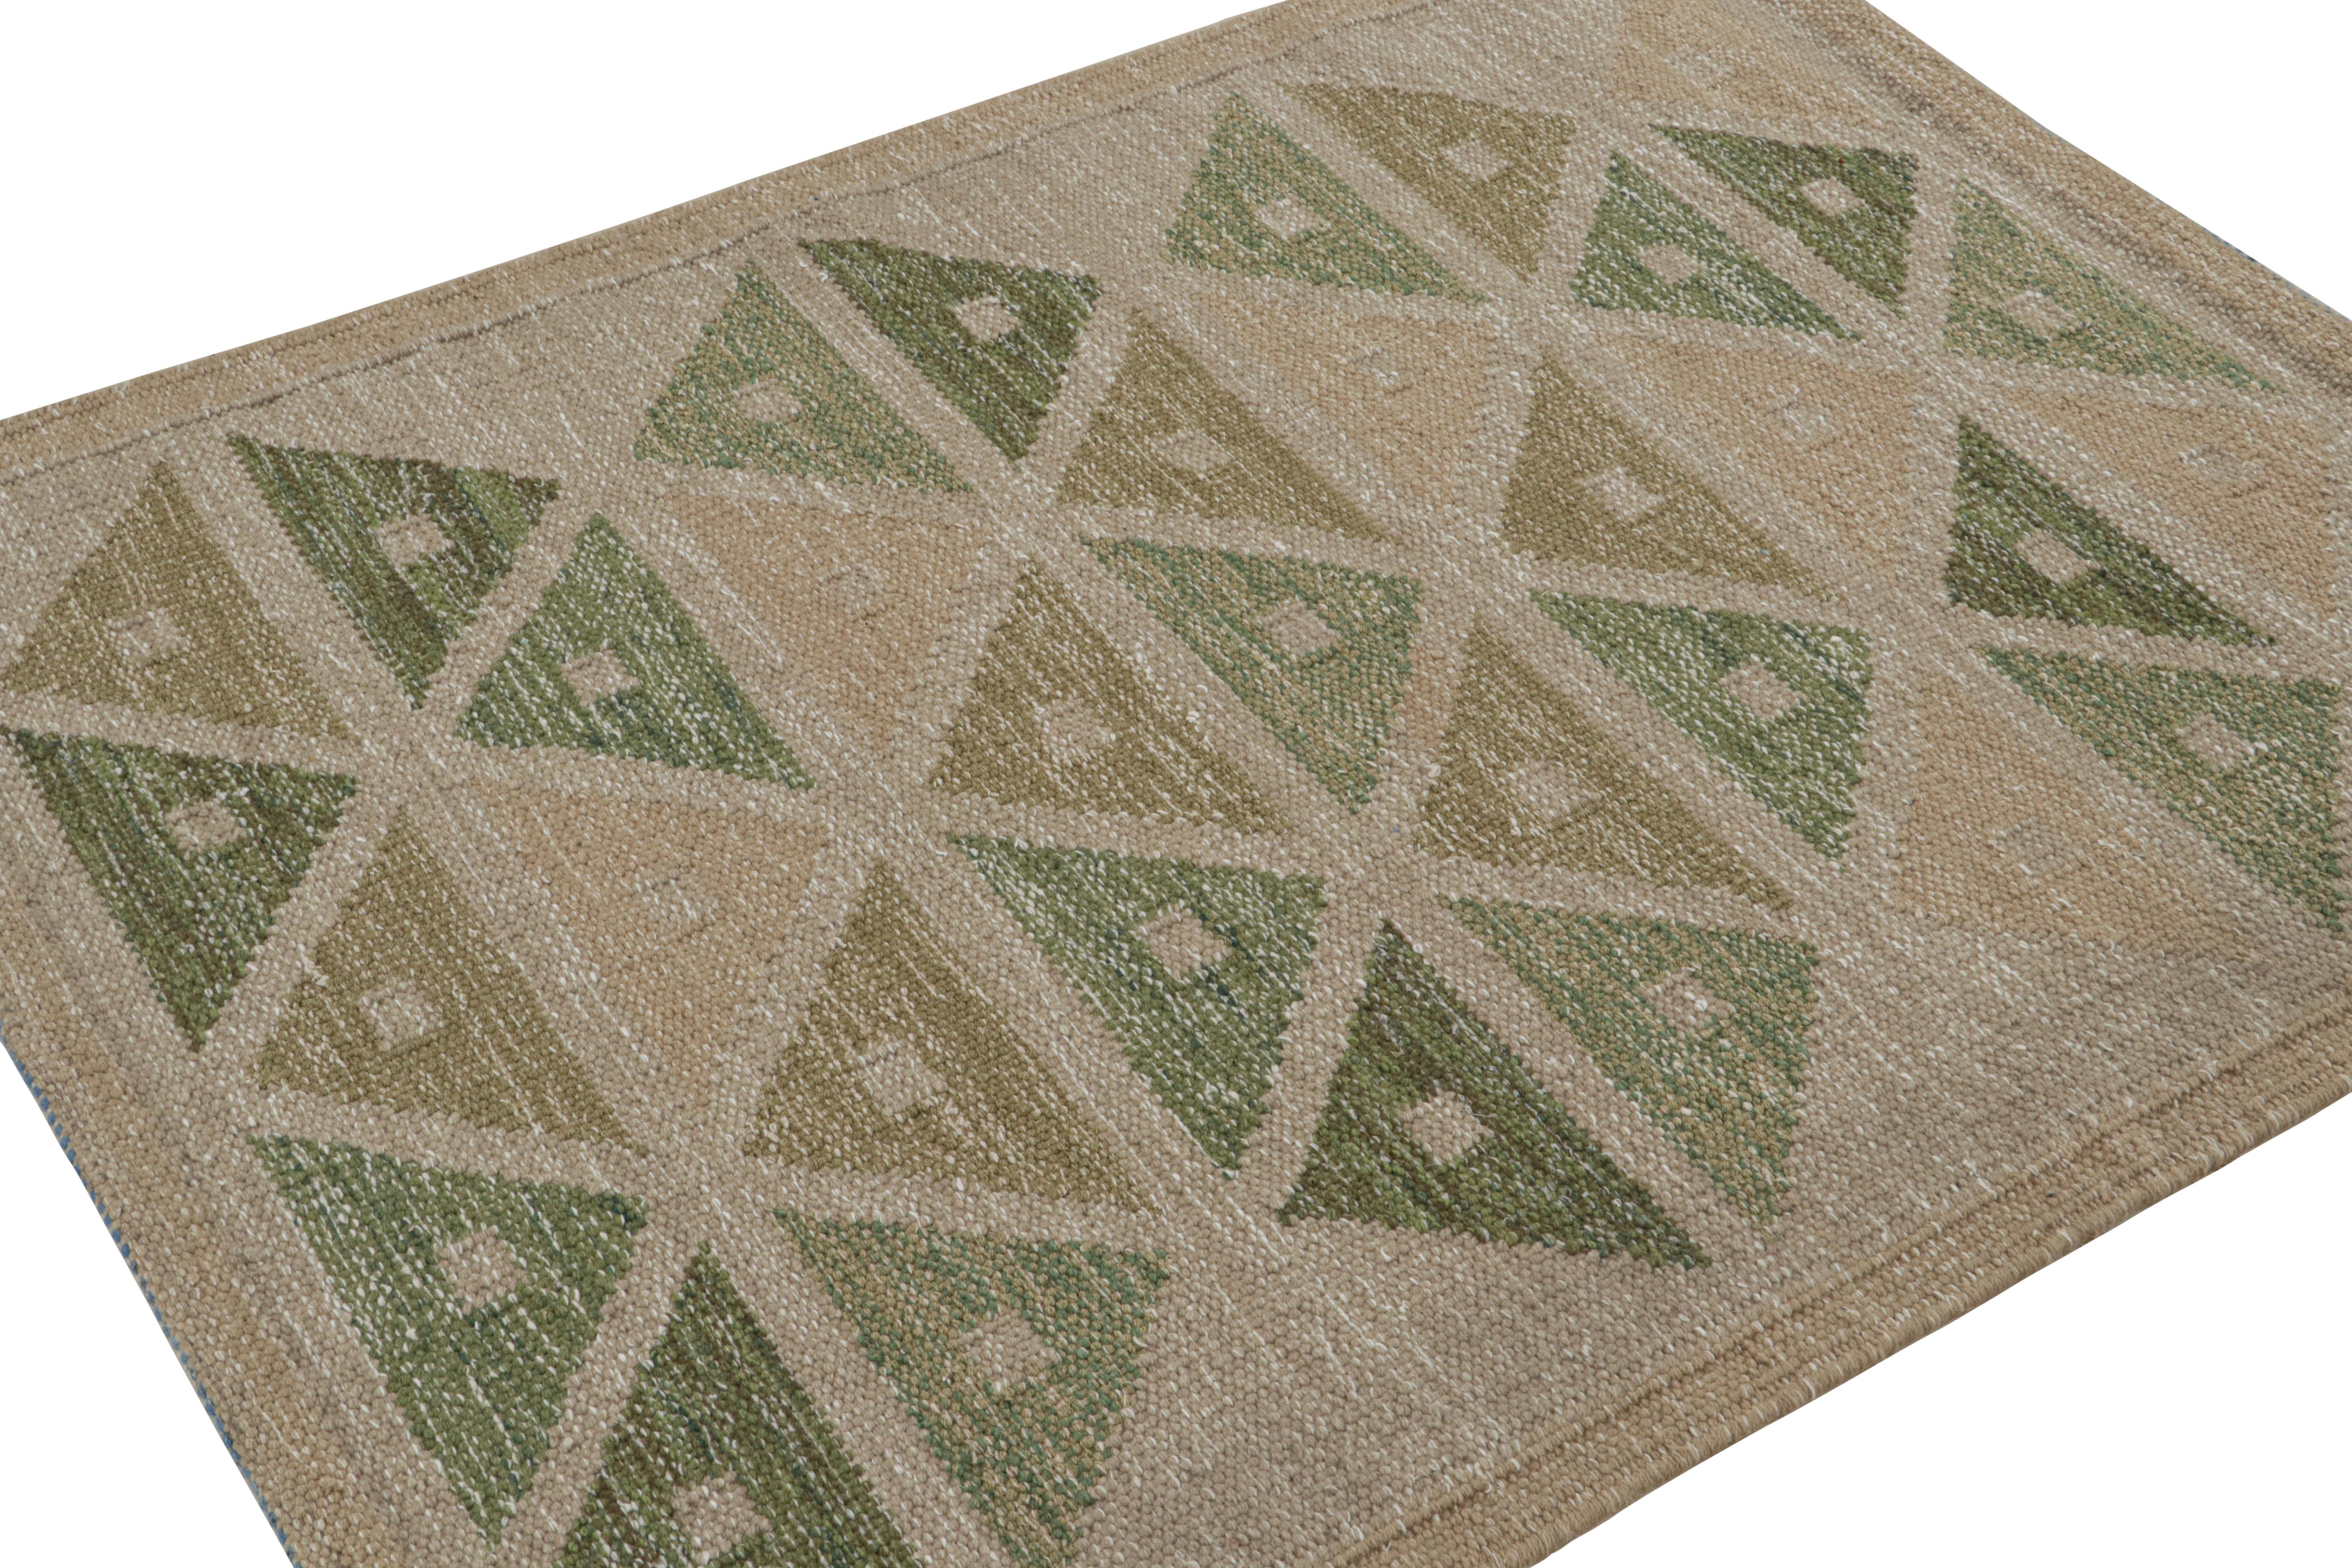 This 4x5 Kilim rug is from the flatweave line in the Scandinavian rug collection by Rug & Kilim. Handwoven in wool, cotton and natural yarns, its design is a modern take on Rollakan and Rya rugs in the Swedish Deco style. 

On the Design: 

These